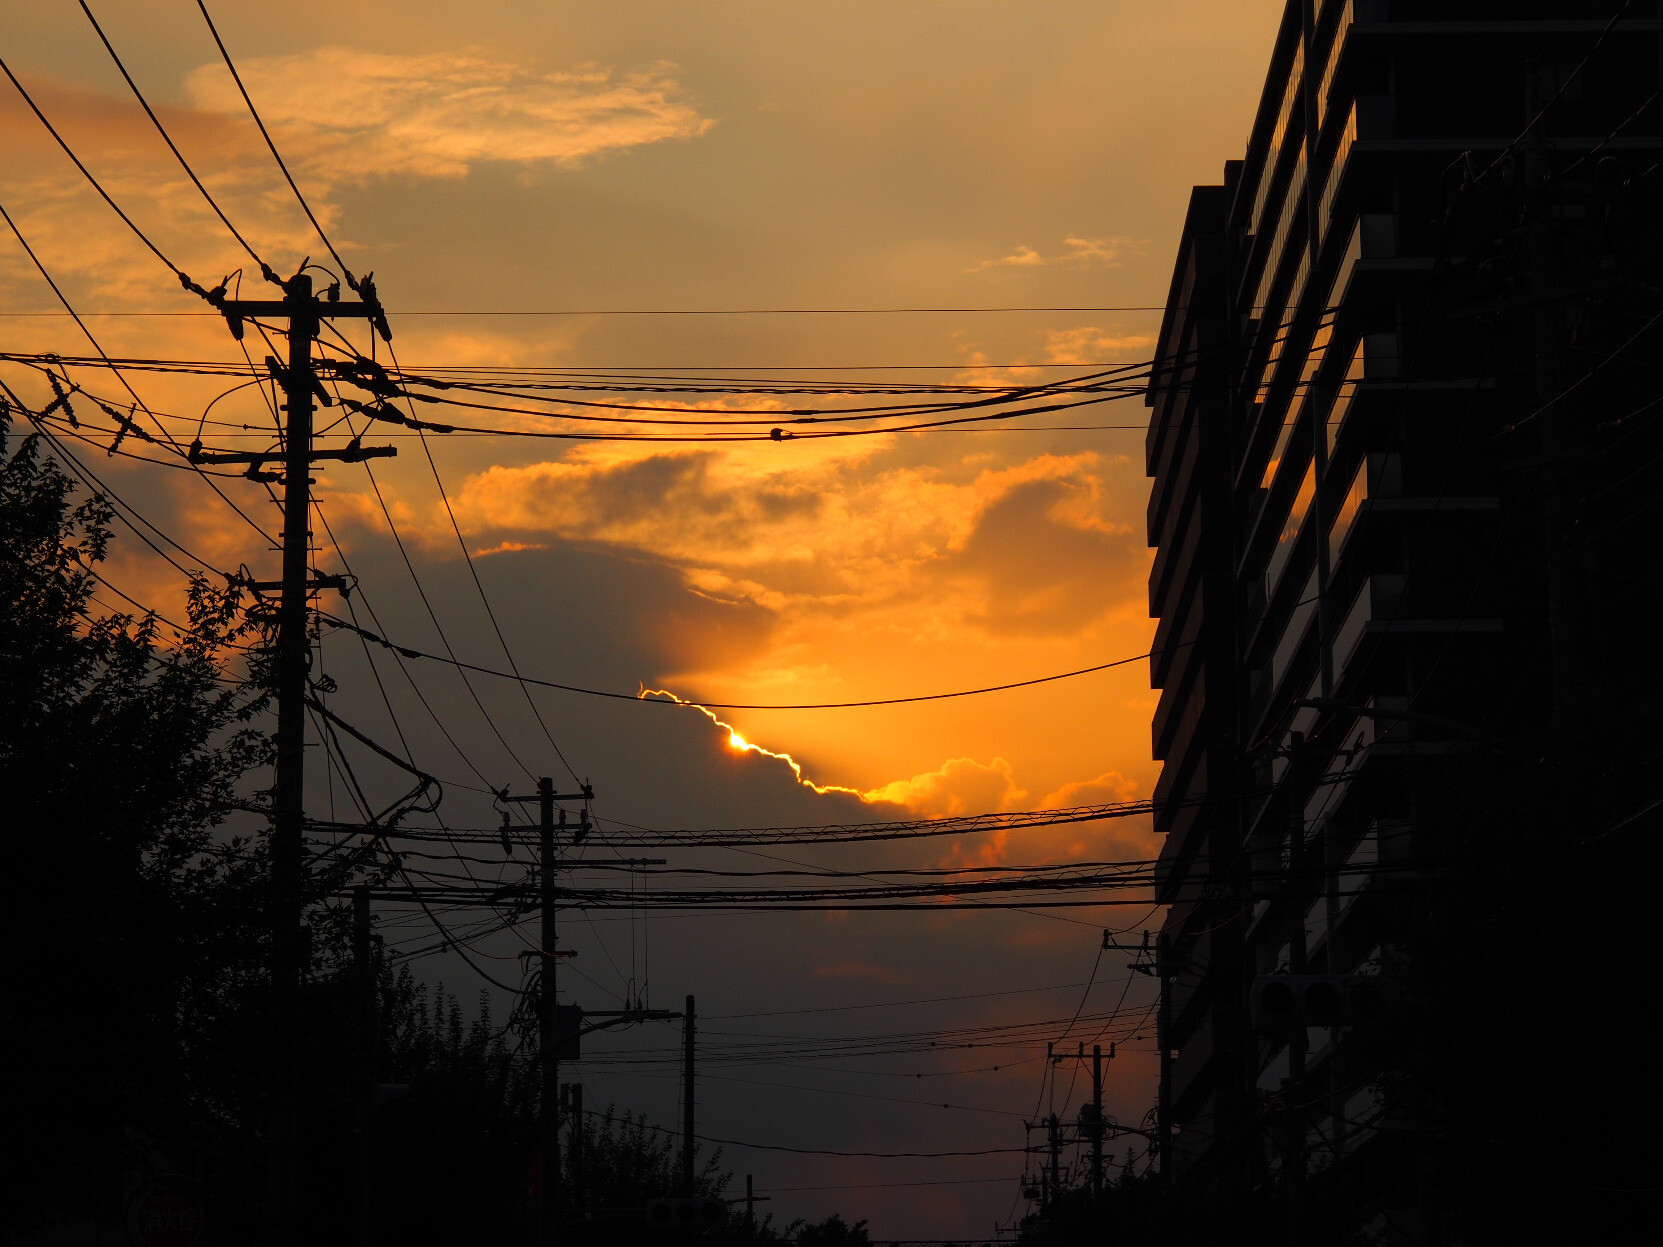 A sliver of an orange setting sun visible above the edge of a dark cloud, brightly highlighting only a thin line of the cloud along the edge. Trees and power poles on the left, and an high apartment building to the right all stand in silhouette.